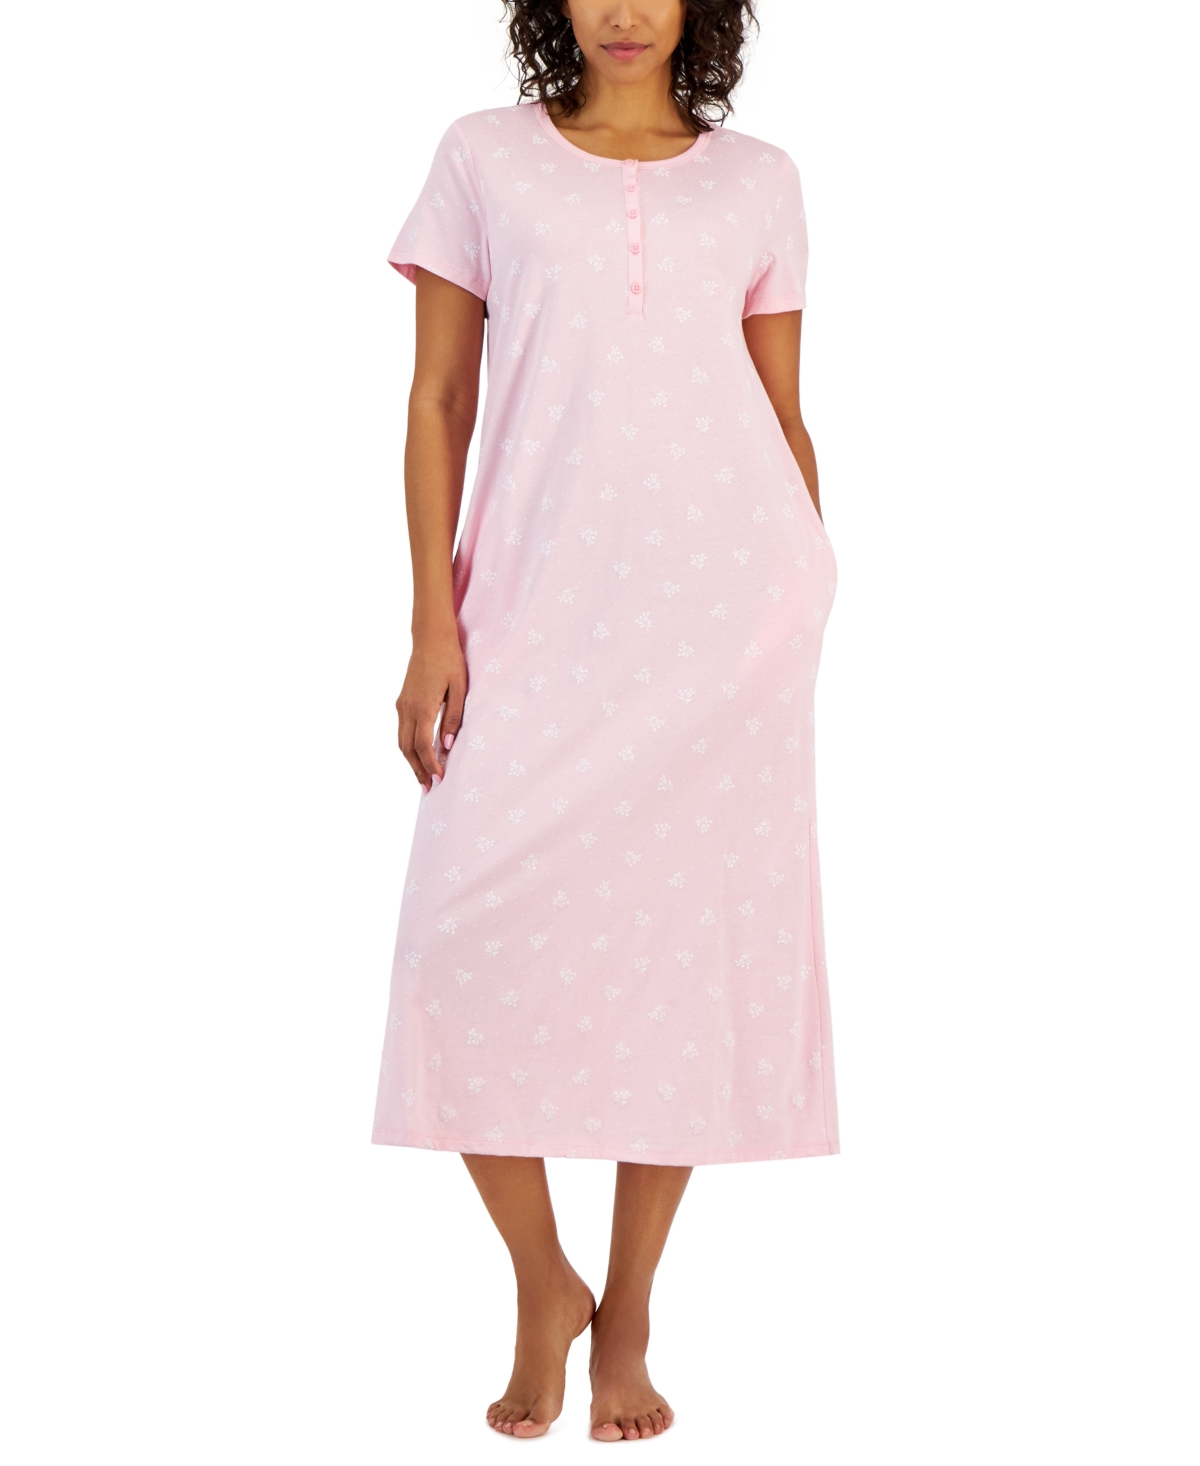 Women's Cotton Printed Nightgown, Created for Macy's - Polka Dots